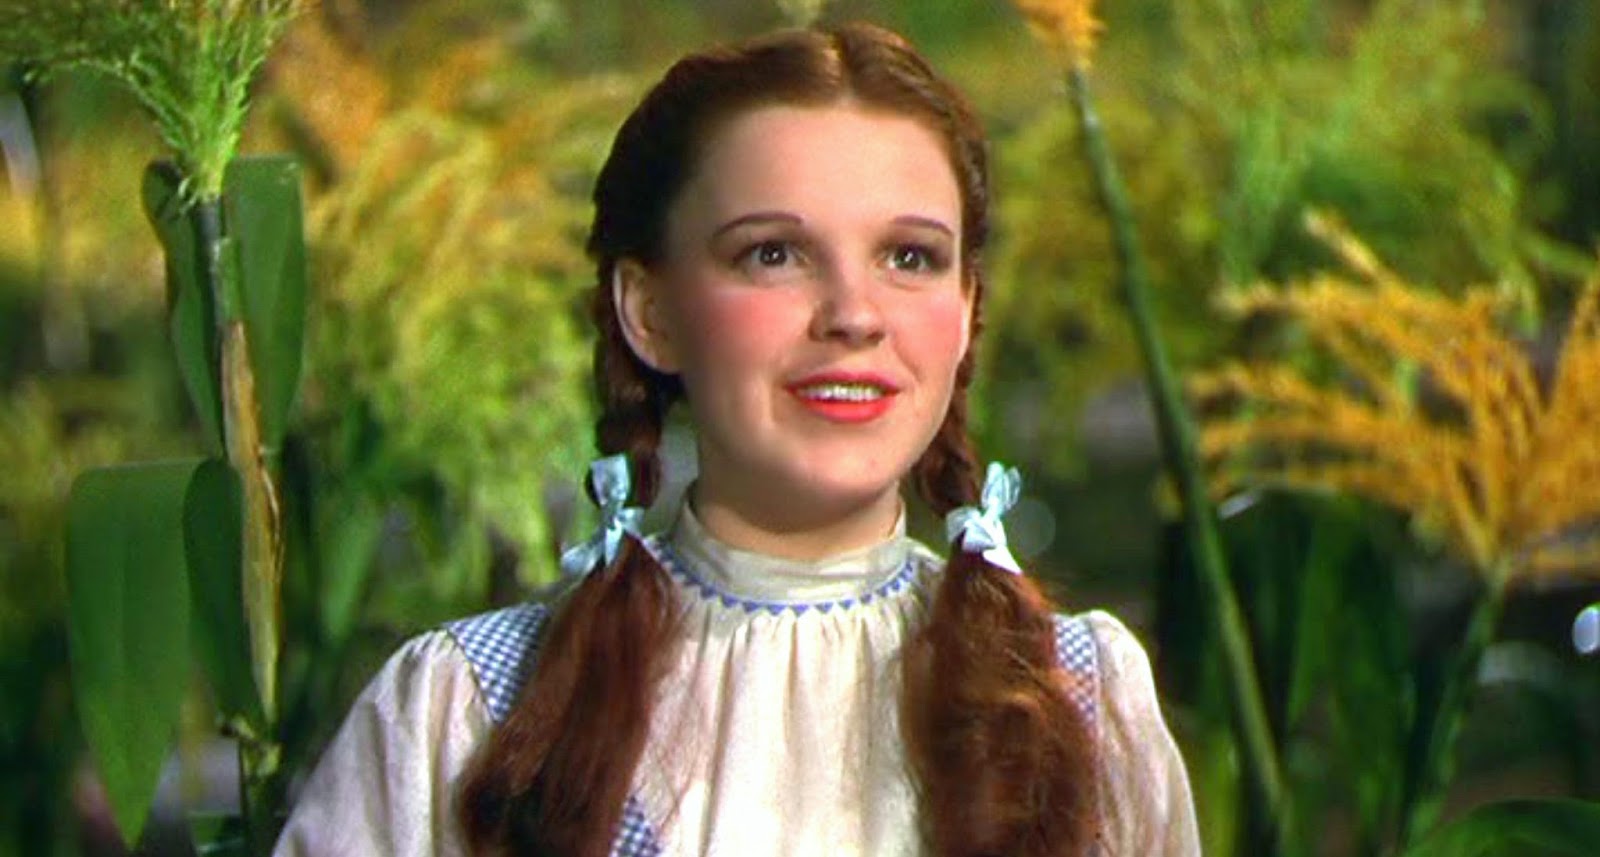 How Well-Rounded Is Your Knowledge? Take This General Knowledge Quiz to Find Out! Dorothy Gale The Wizard of Oz